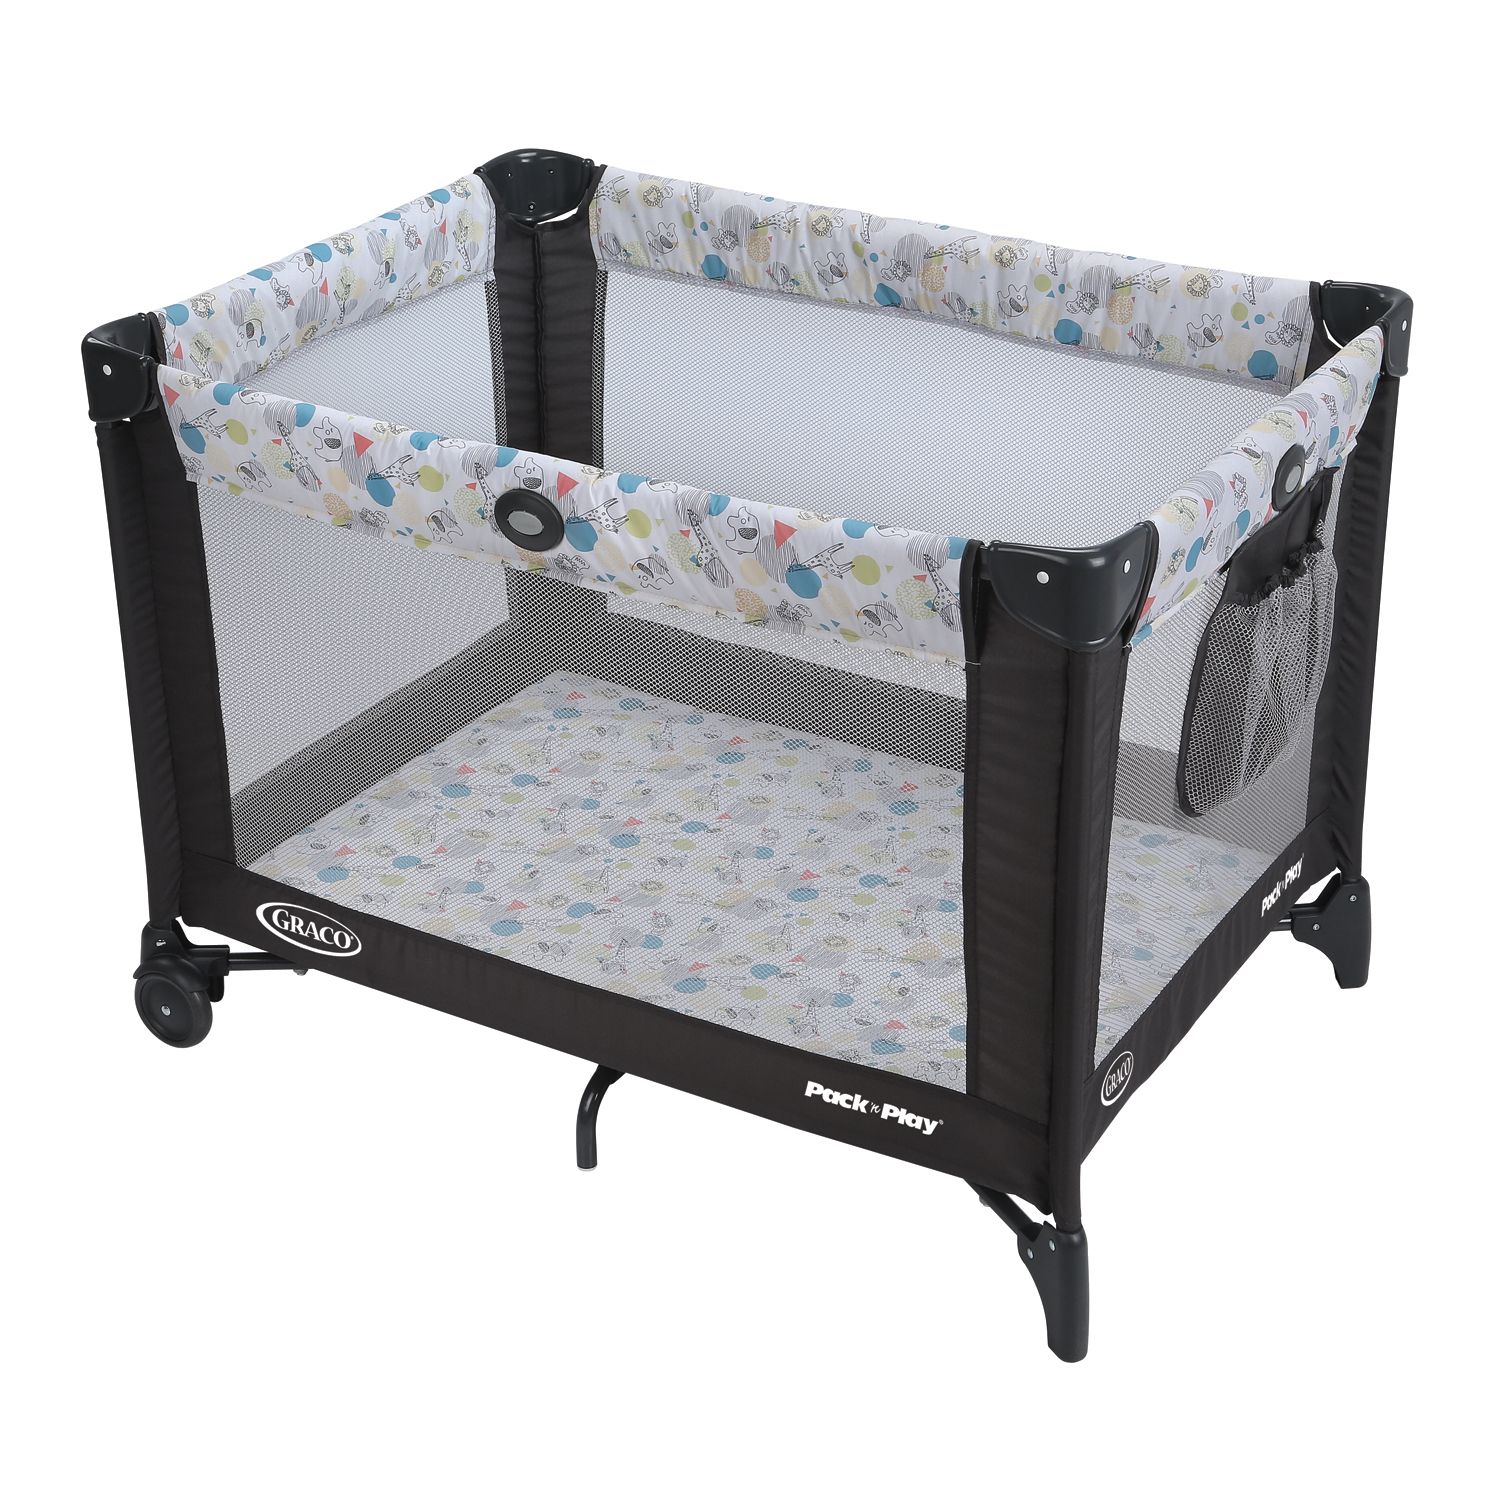 graco pack and play how to set up